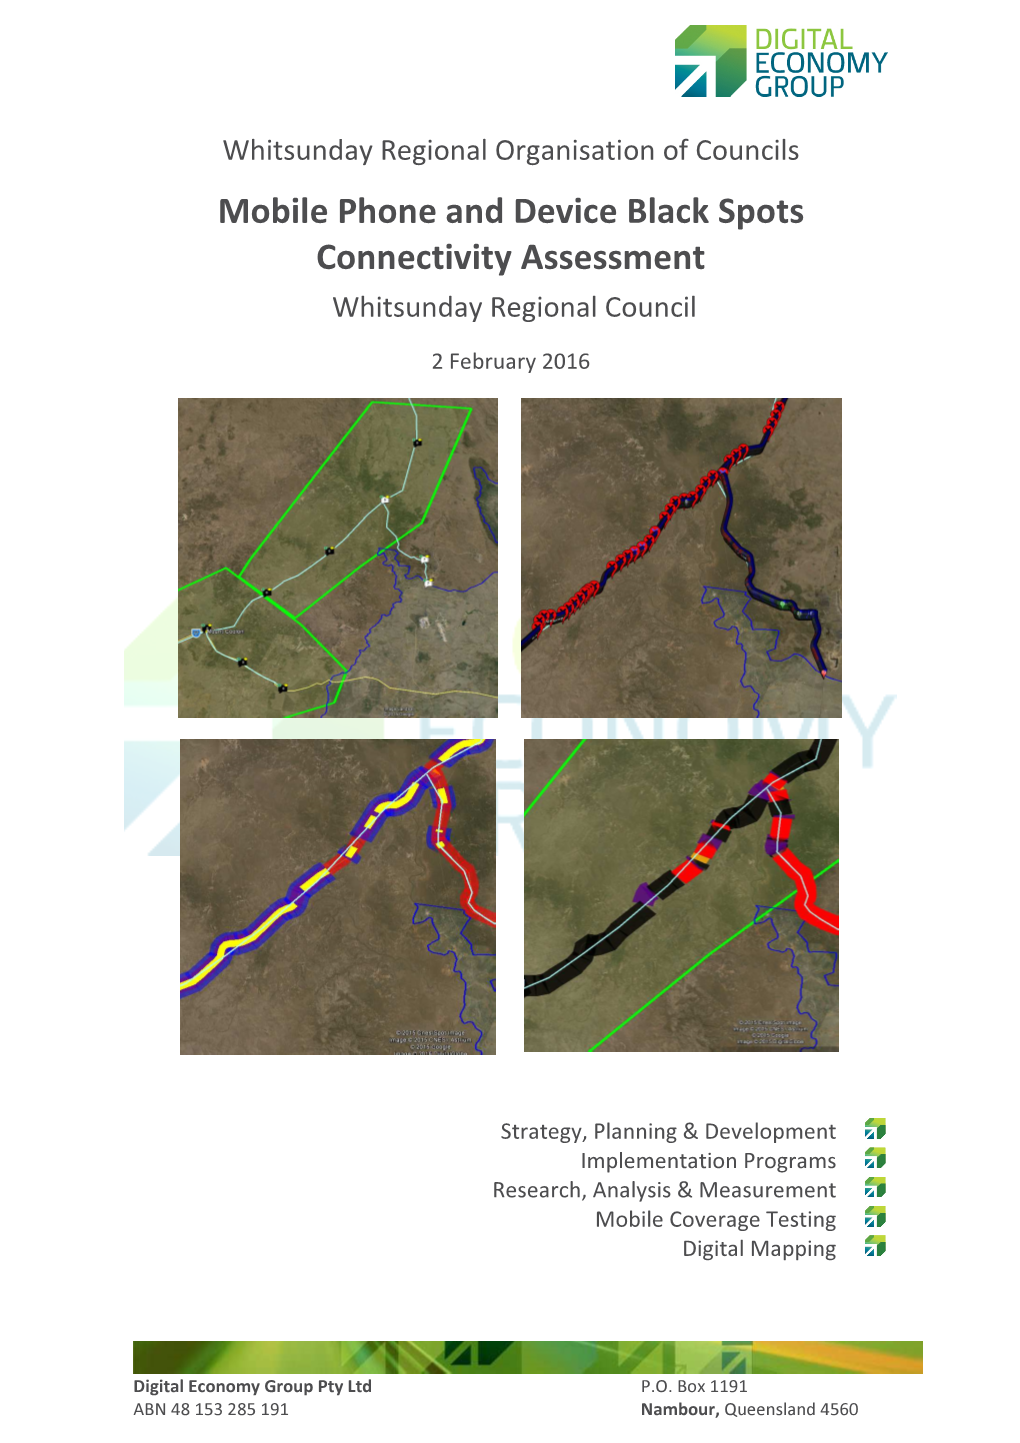 Mobile Phone and Device Black Spots Connectivity Assessment